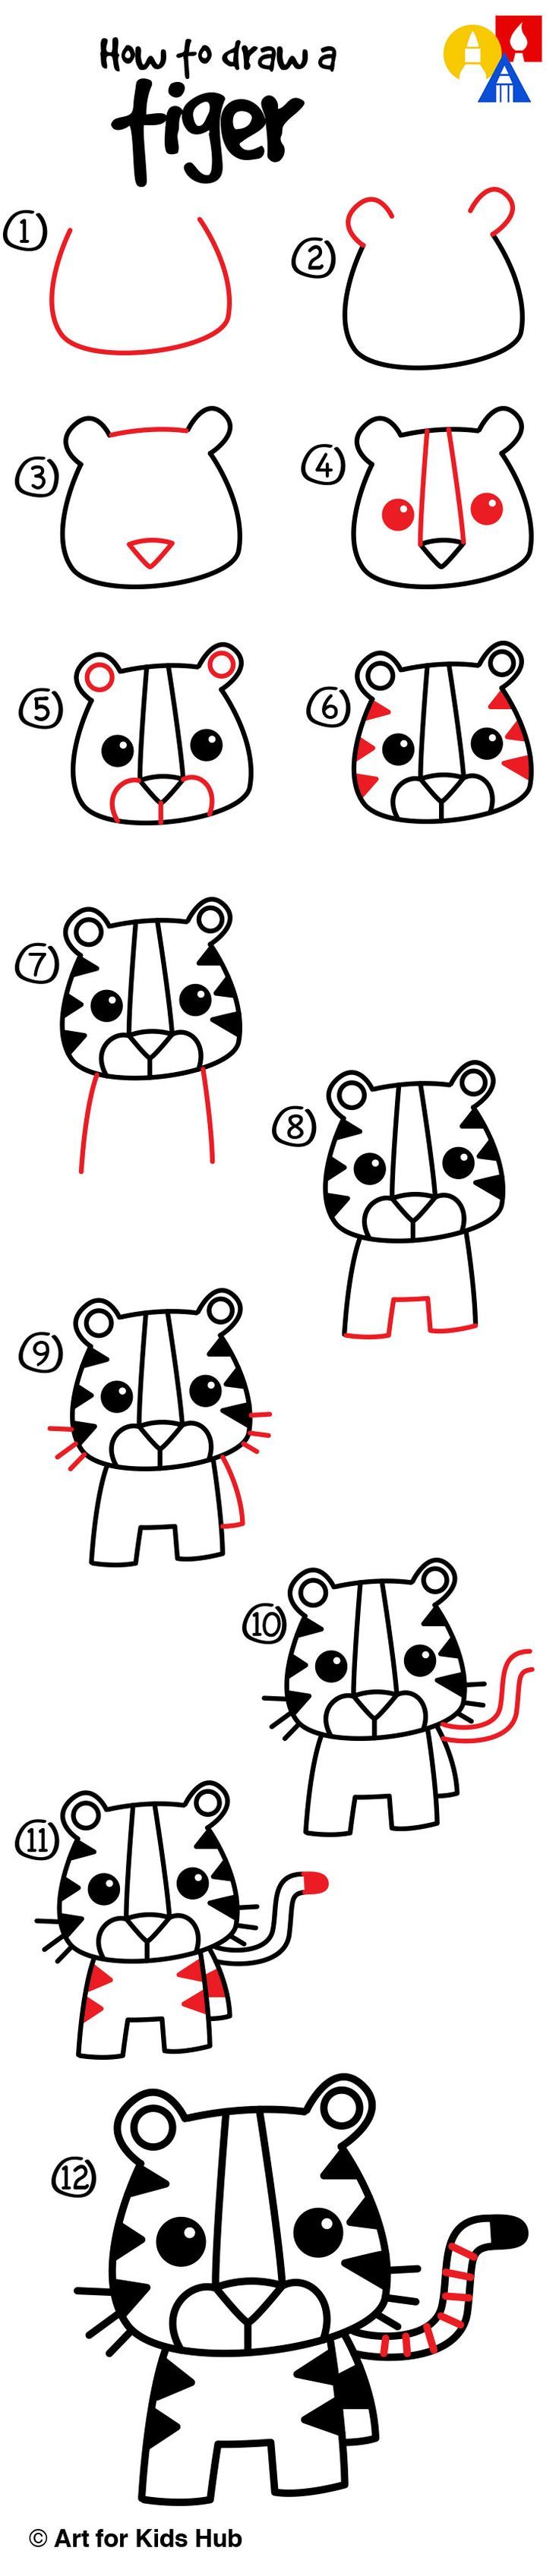 How to draw a cartoon tiger, just for kids! Wallpaper